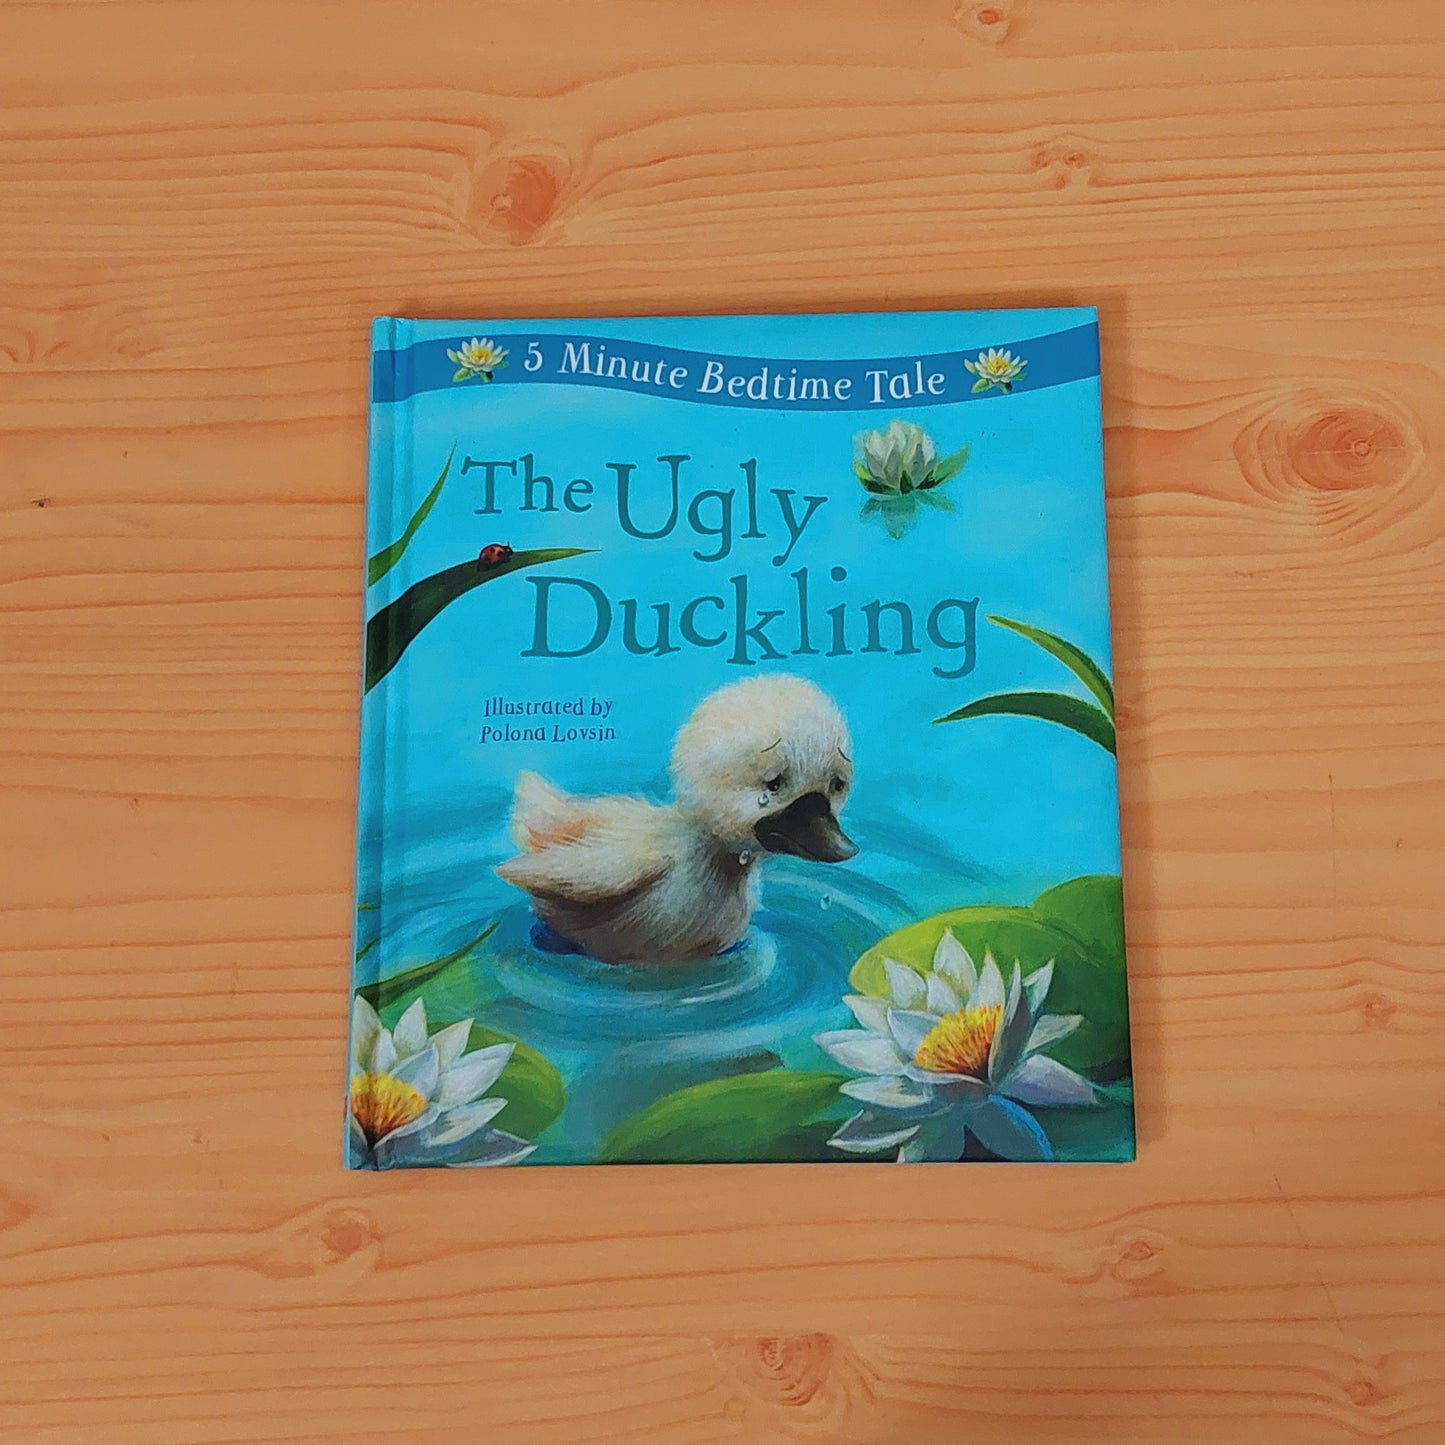 5 Minute Bedtime Tale - The Ugly Duckling